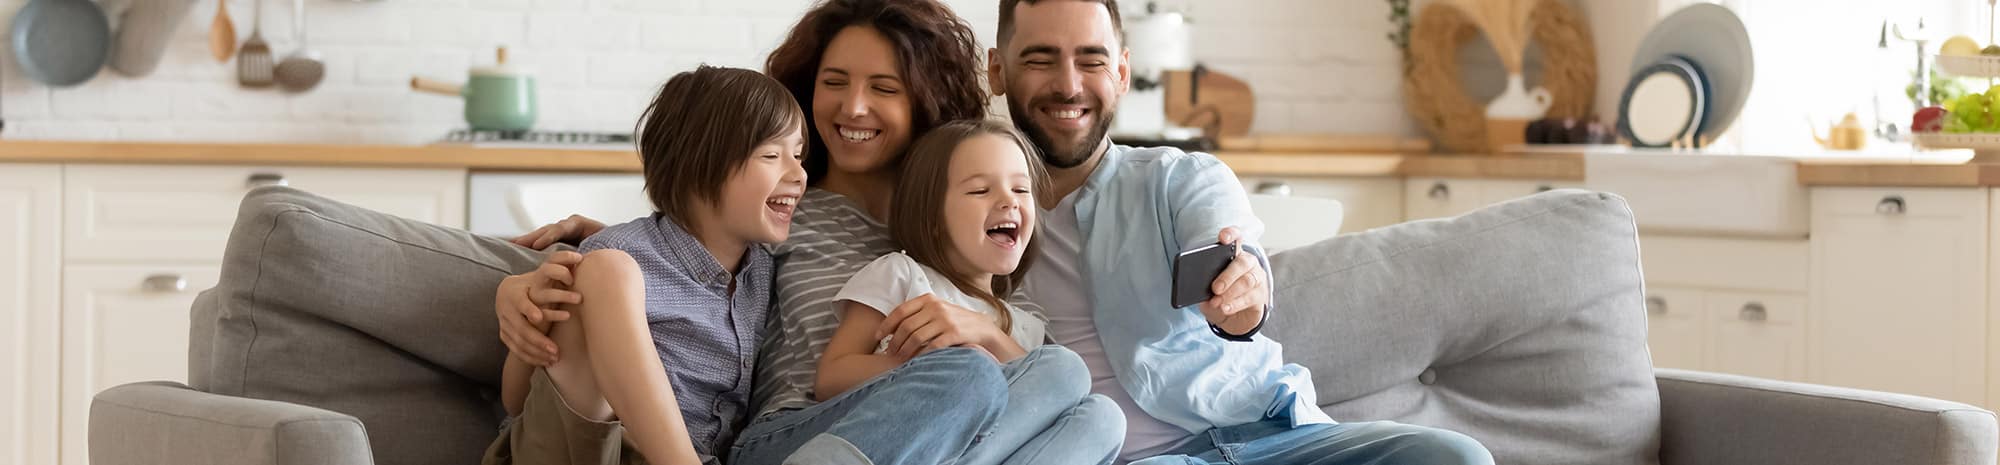 Mom, dad, and two kids reunited after a family addiction program - sitting on a couch and smiling while watching dads cellphone